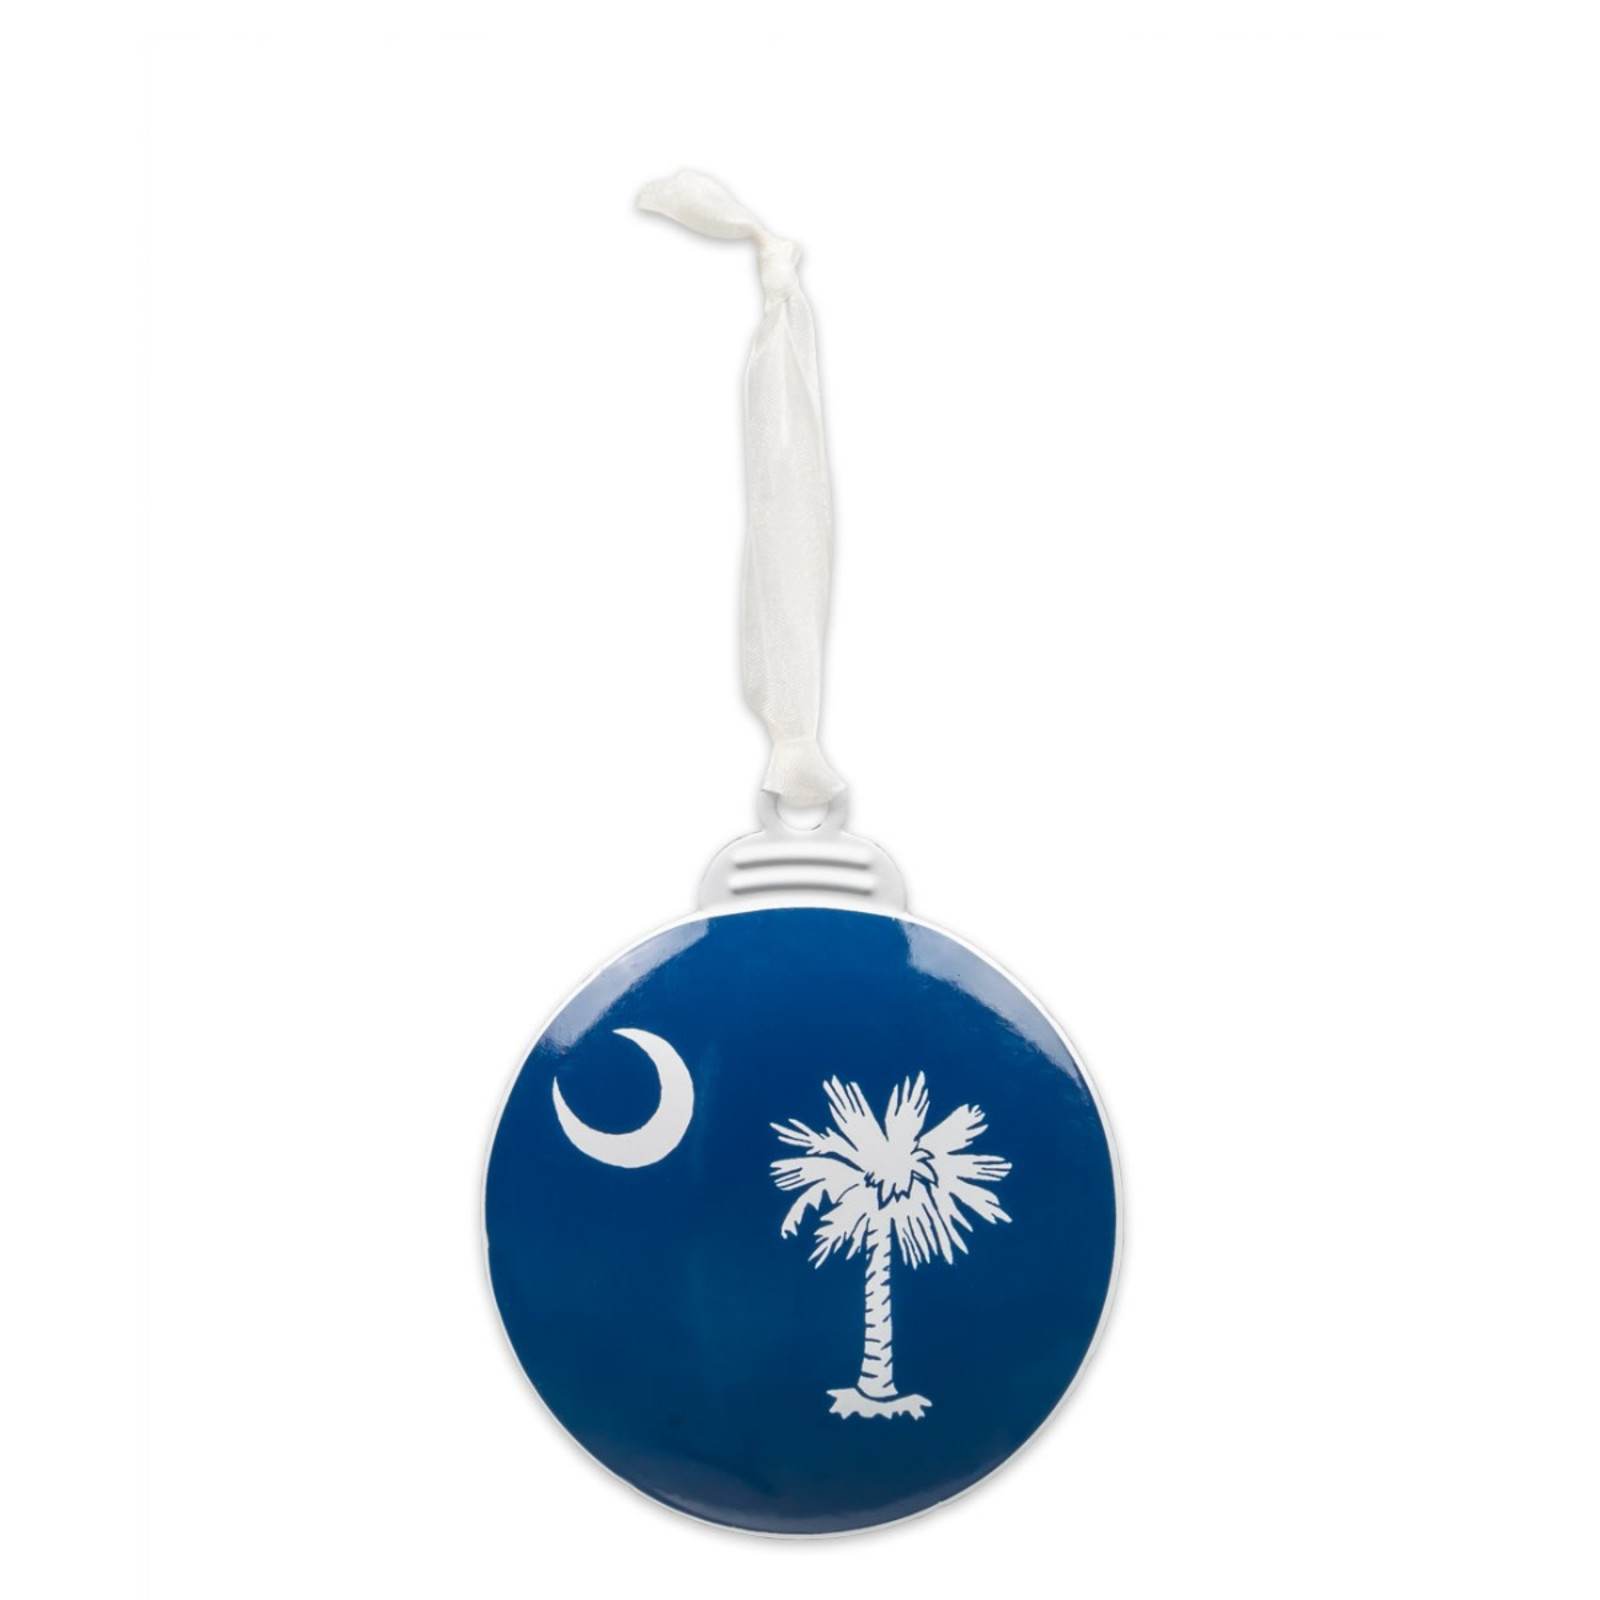 Brownlow Gifts South Carolina Flag Personalizable Ornament   74881 loading=